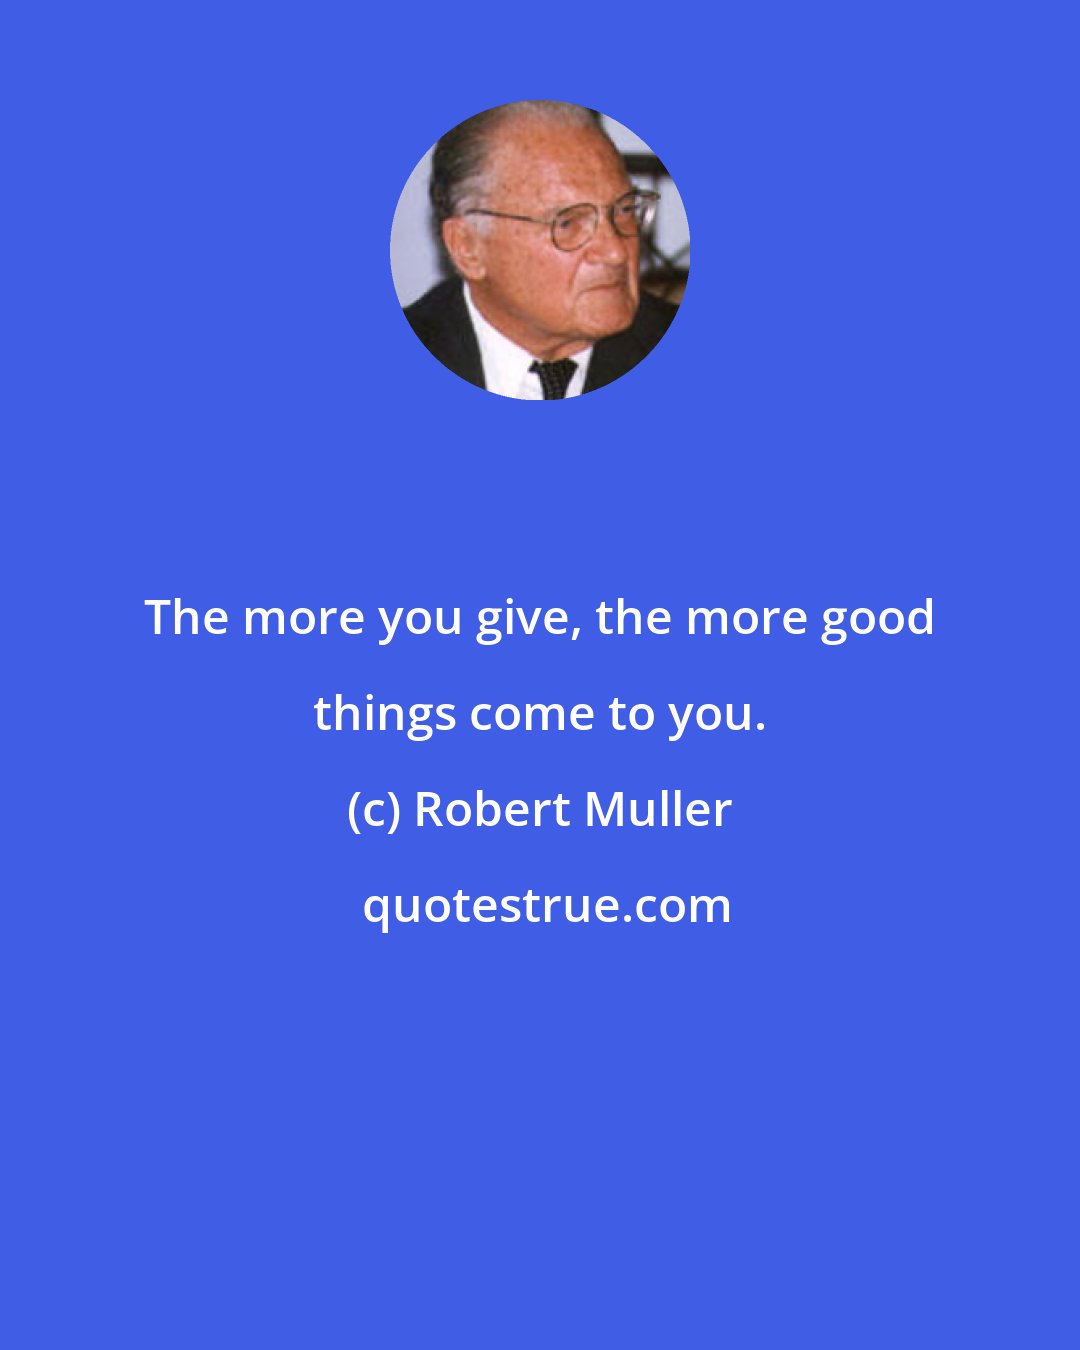 Robert Muller: The more you give, the more good things come to you.